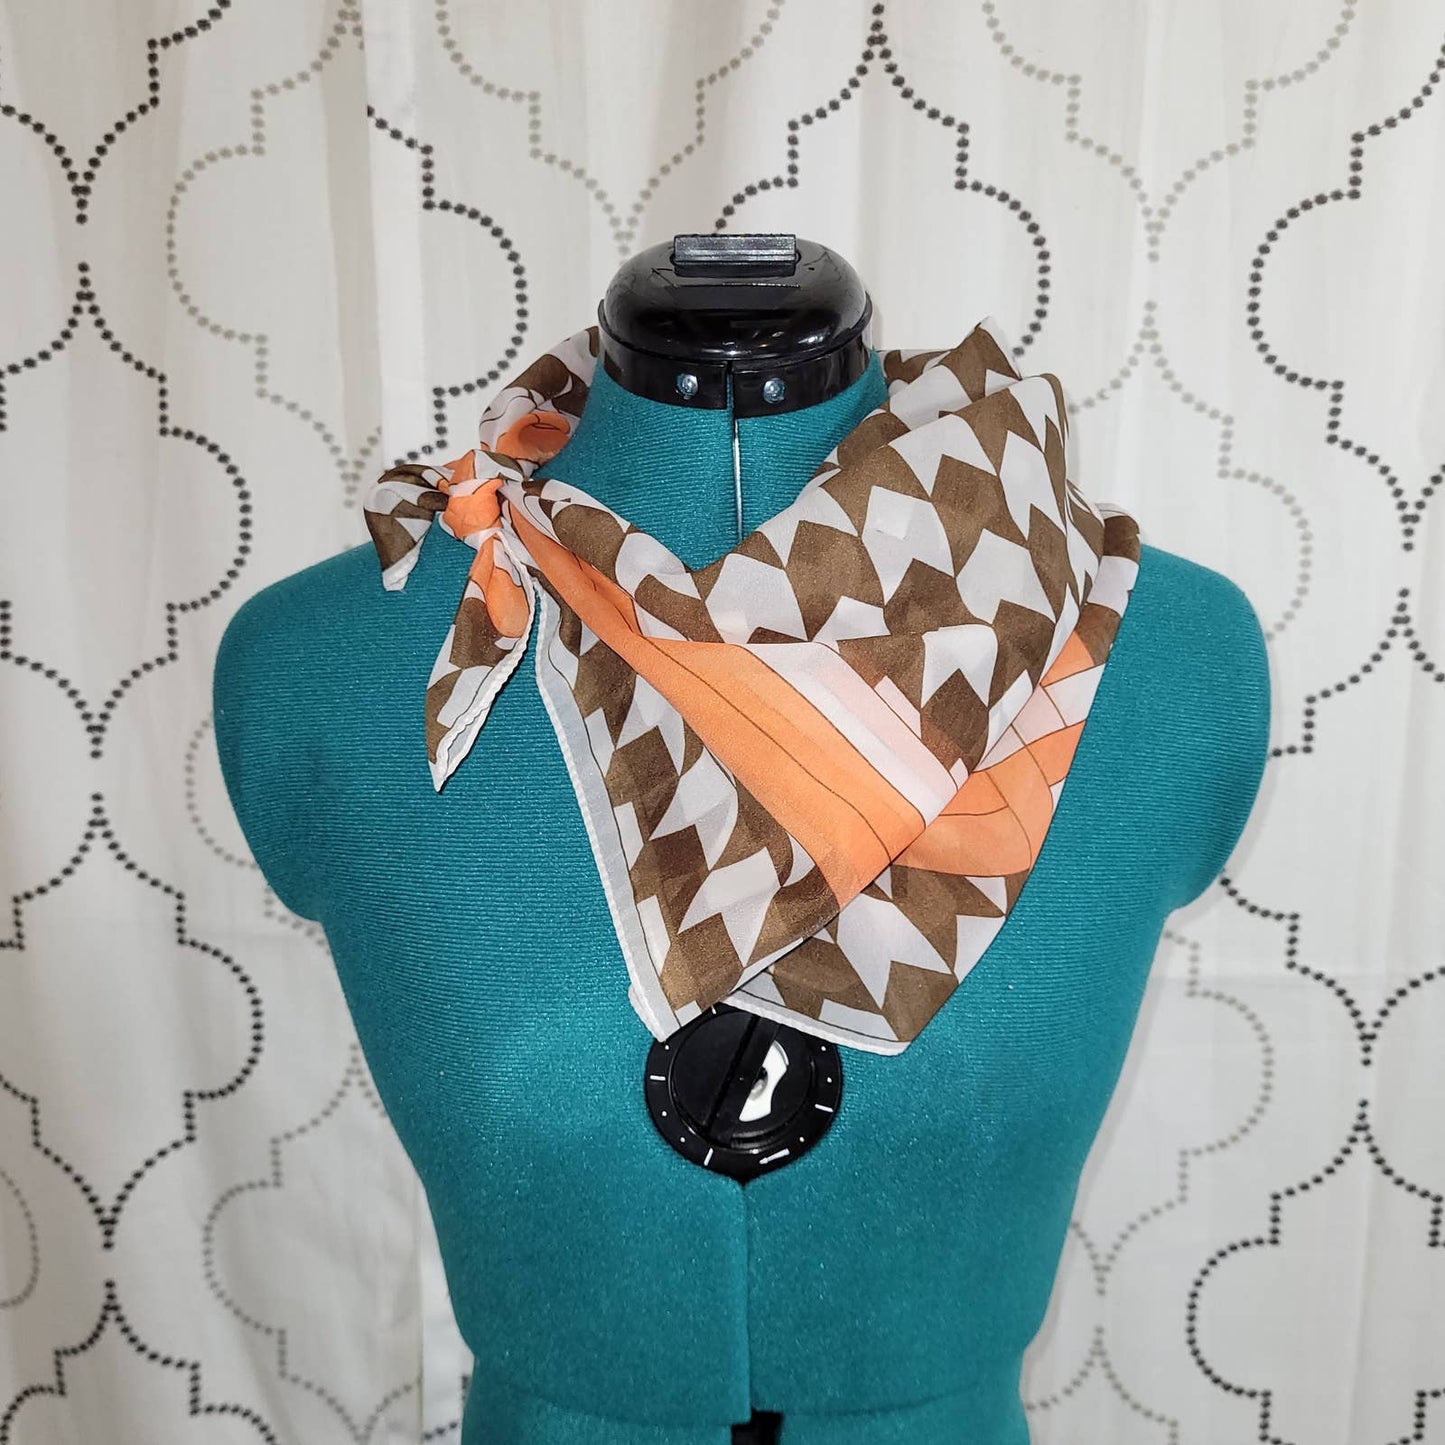 Square Scarf with Chevron / Houndstooth Pattern in Brown, Orange, and White